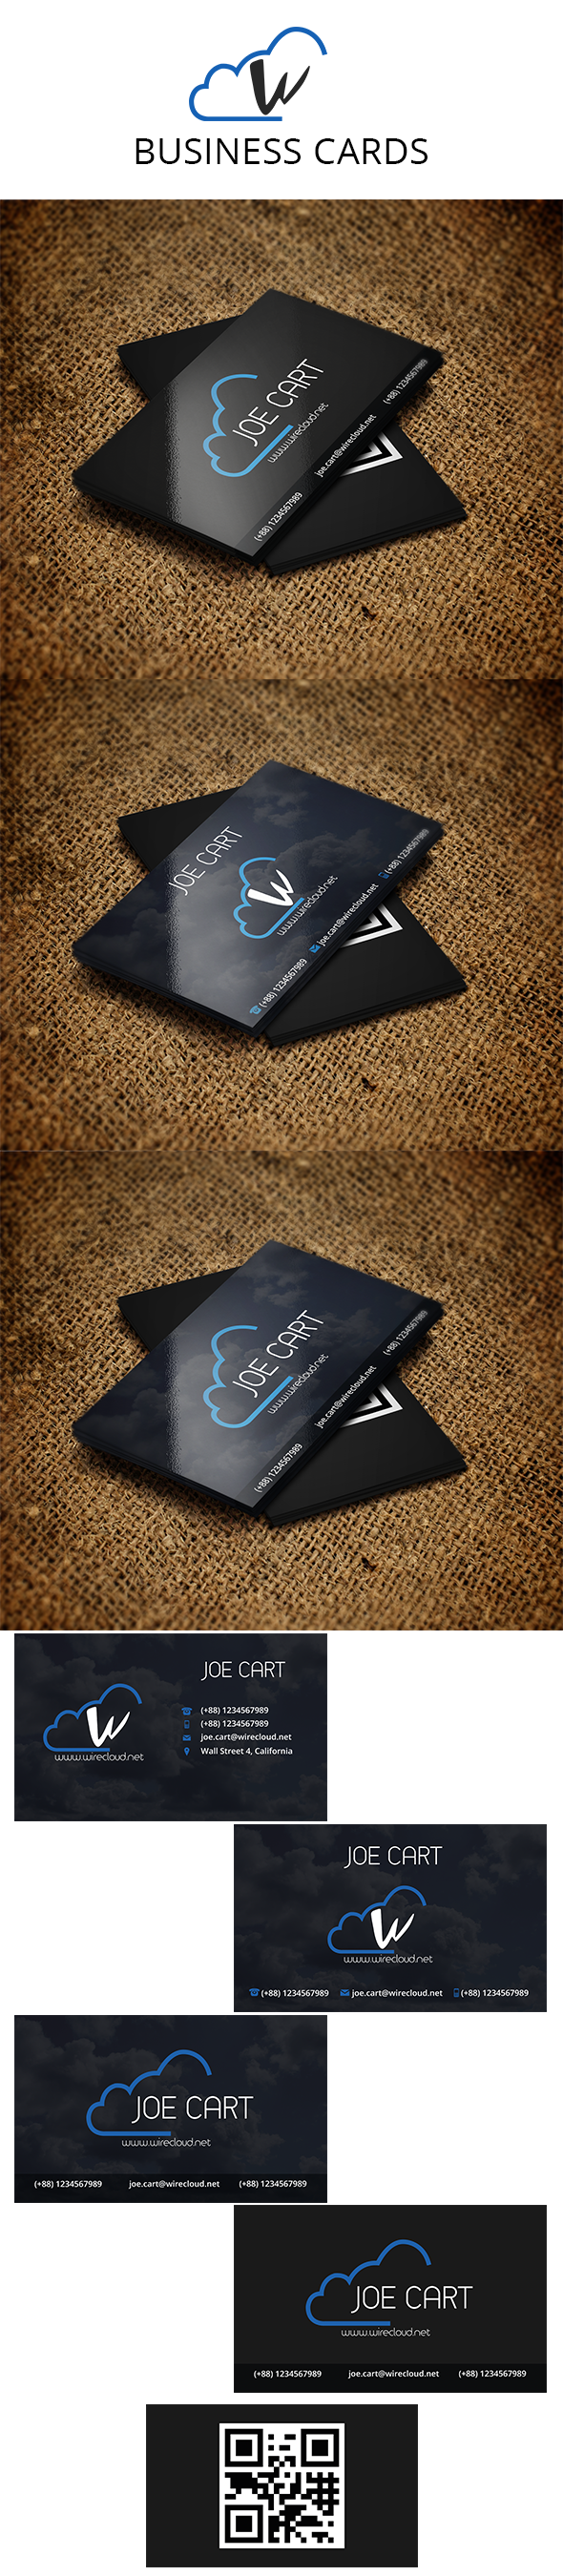 Corporate Business Card - WireCloud